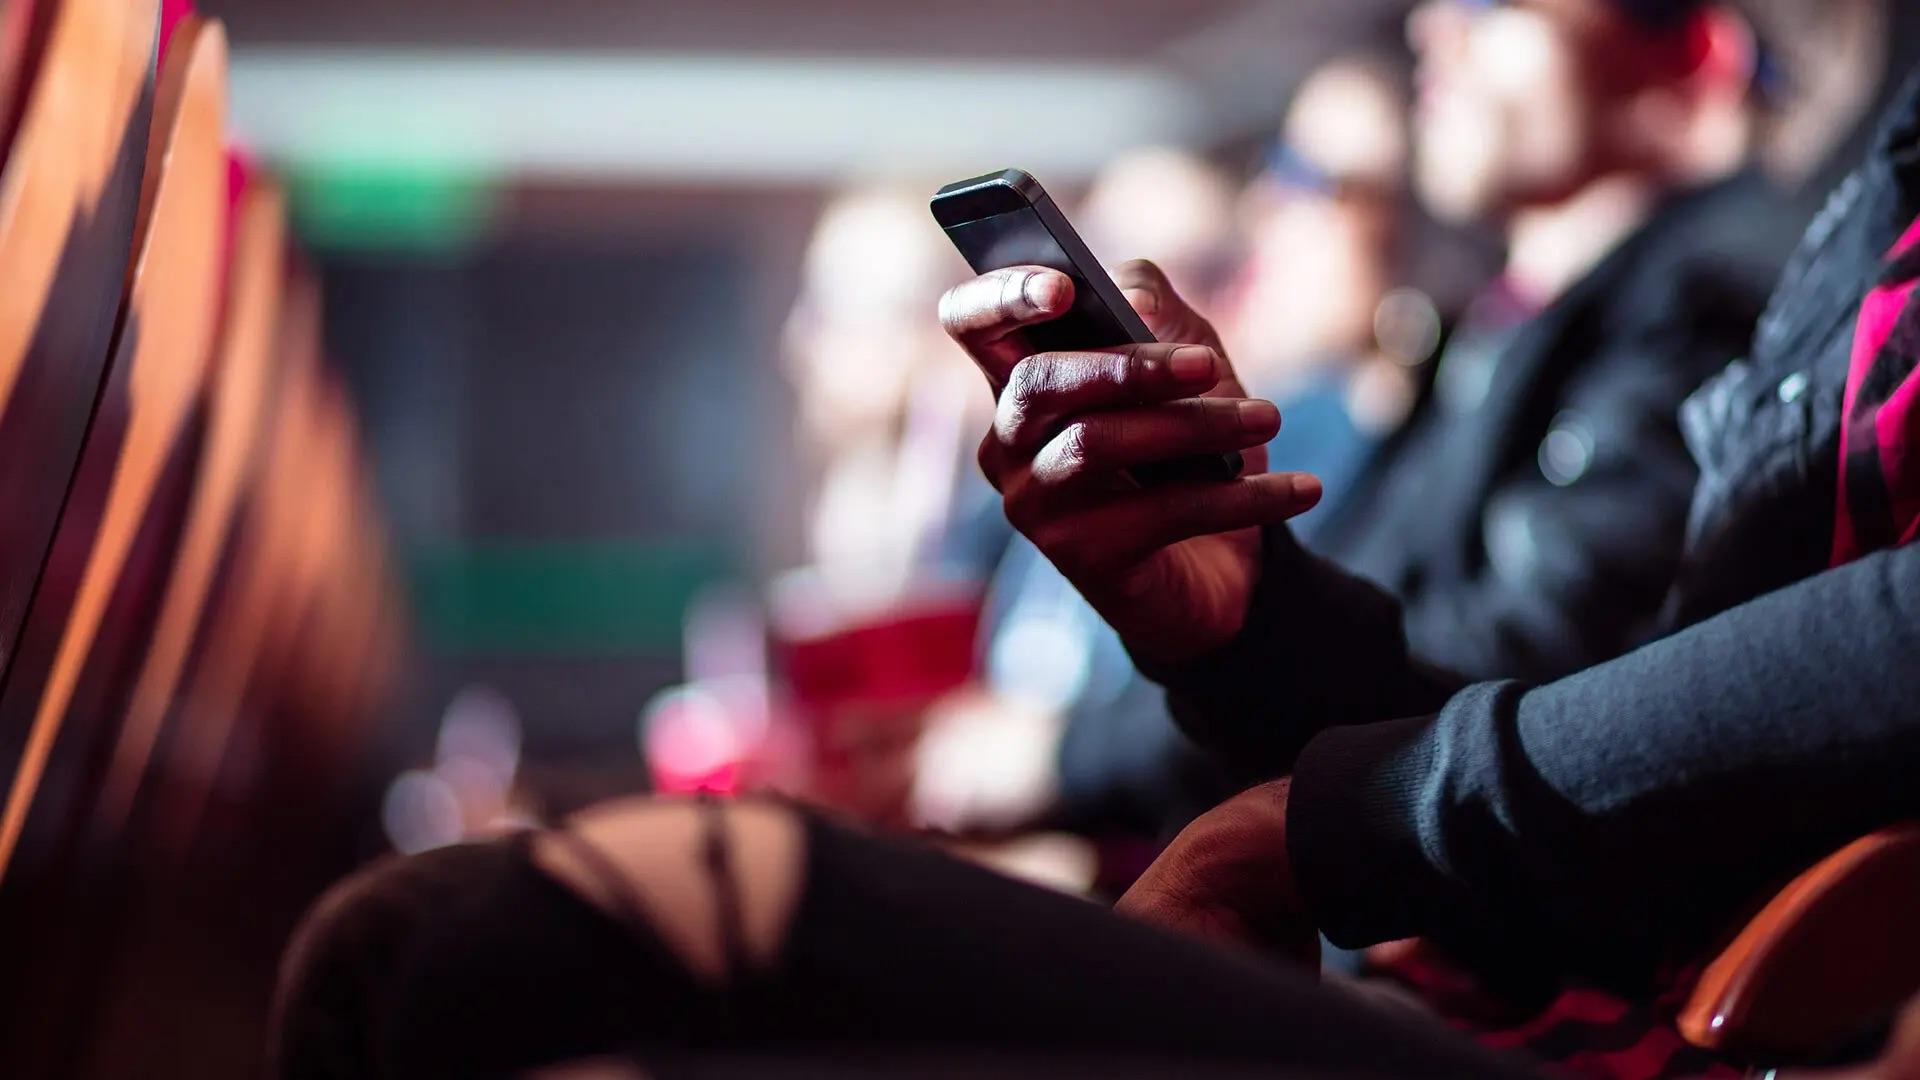 An audience member uses a smartphone.